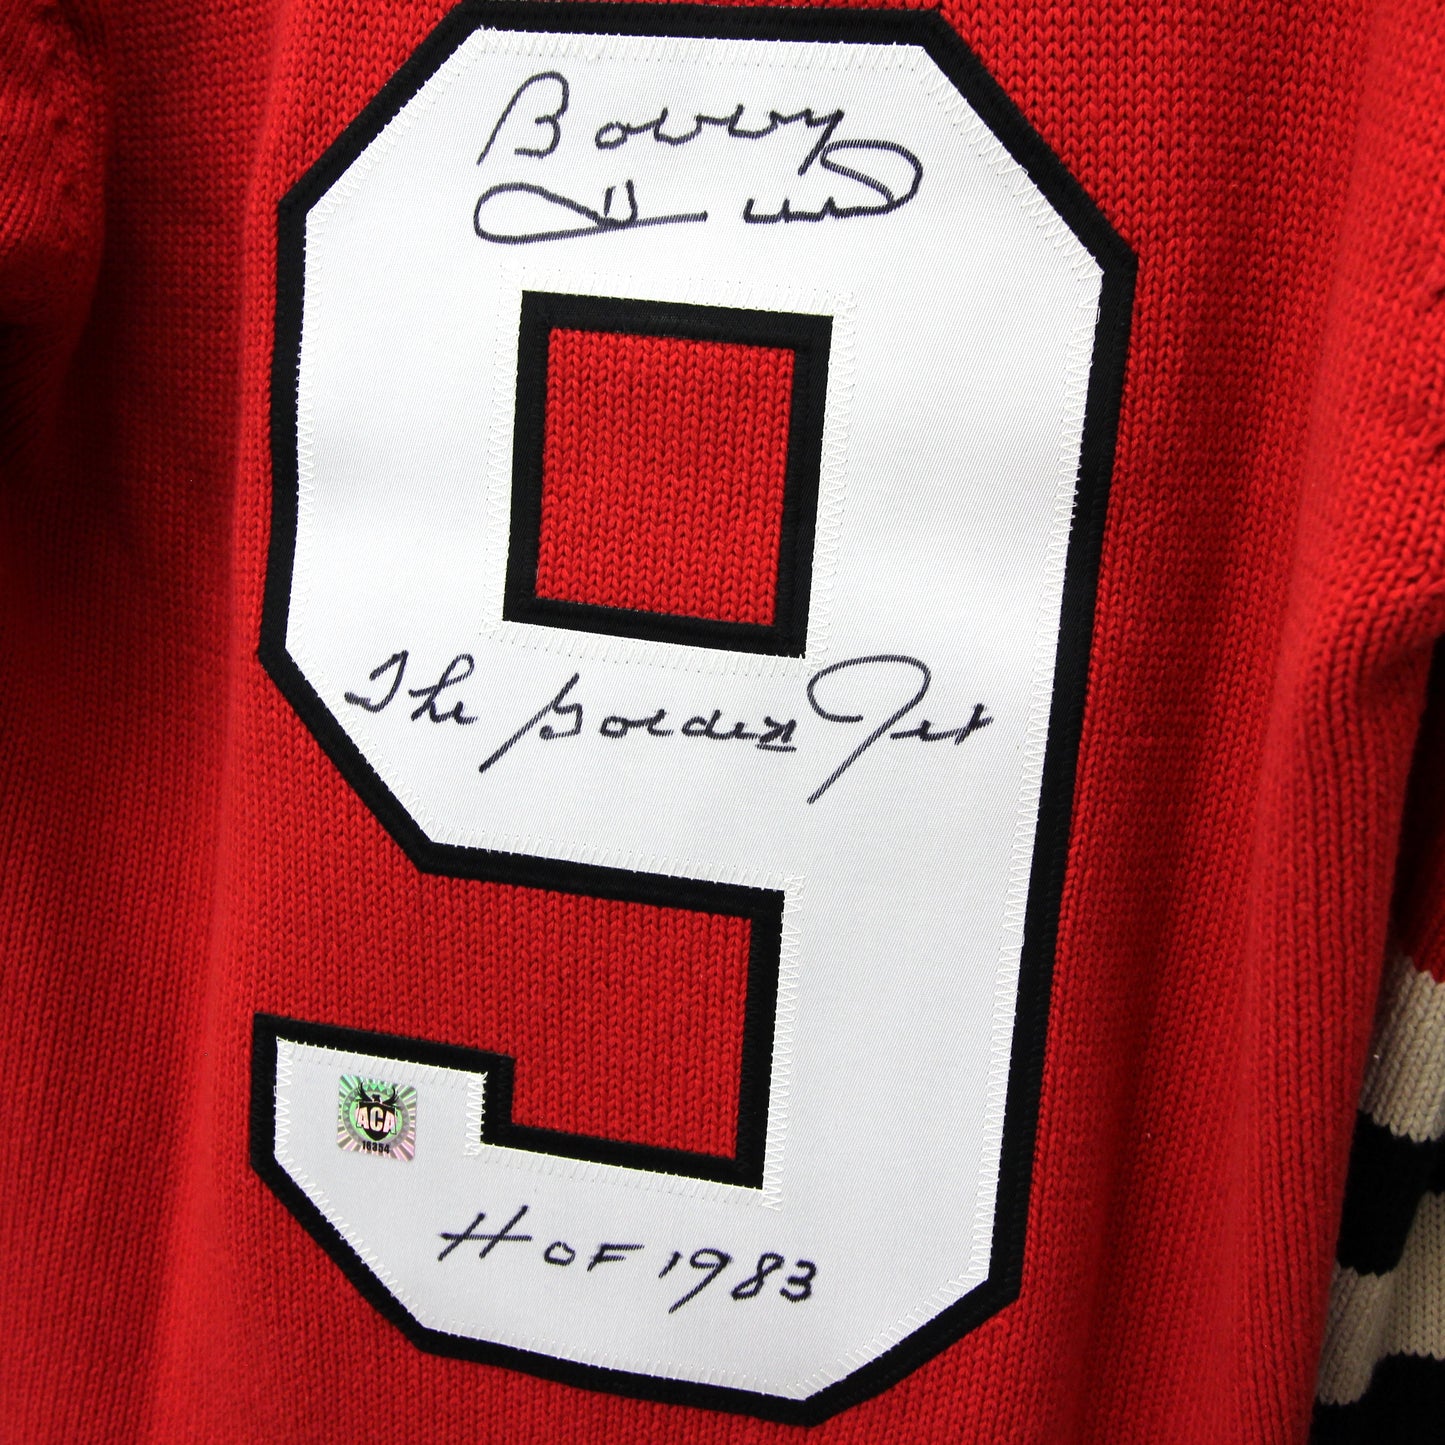 Bobby Hull - Black Hawks - Autographed Jersey / Chandail autographié